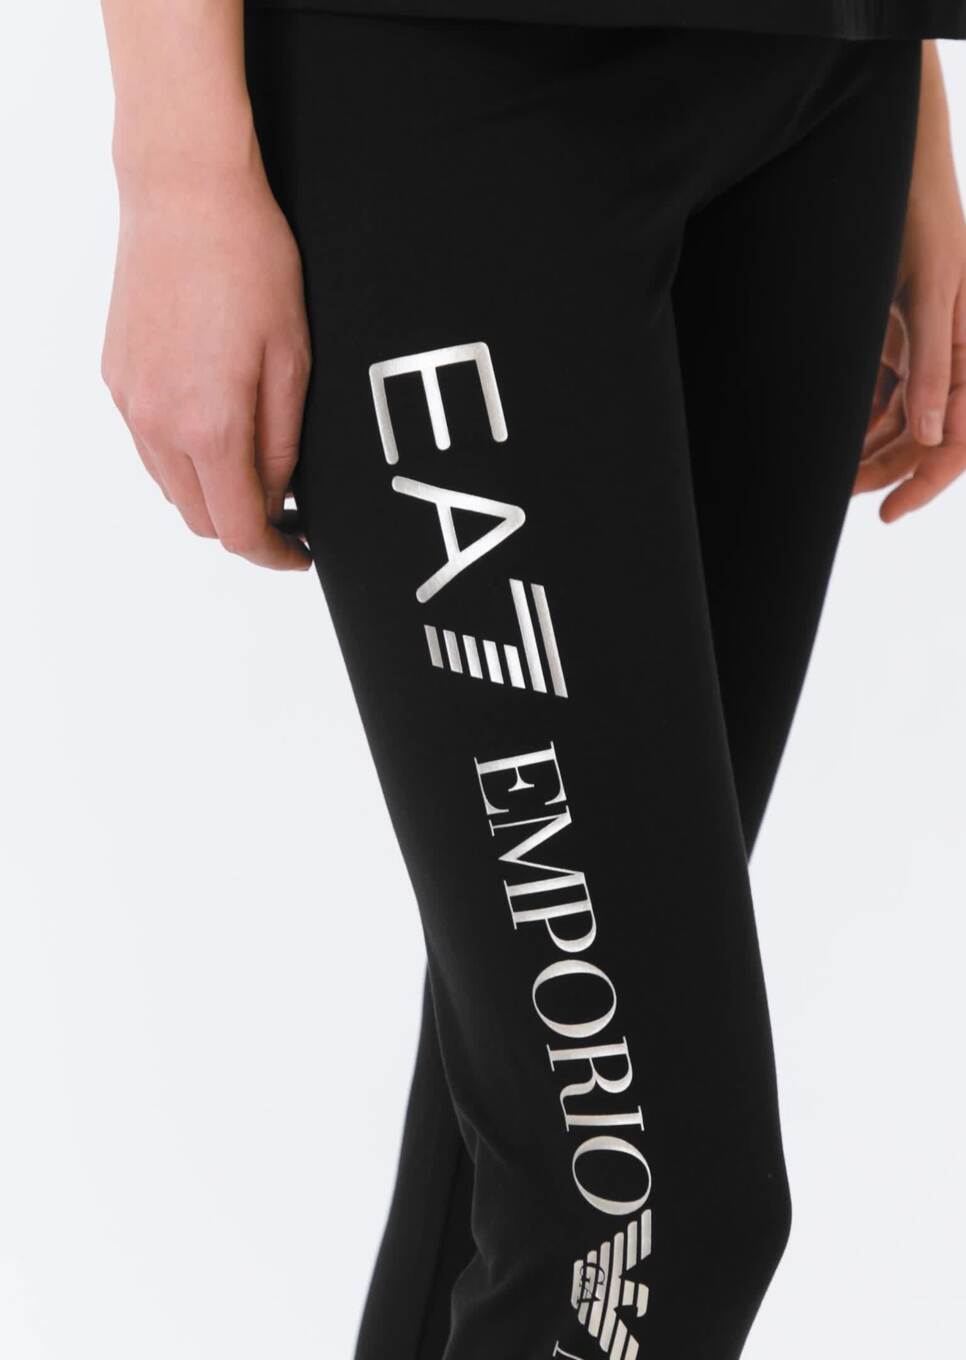 Buy EA7 Emporio Armani Leggings in Kuwait, Up to 60% Off